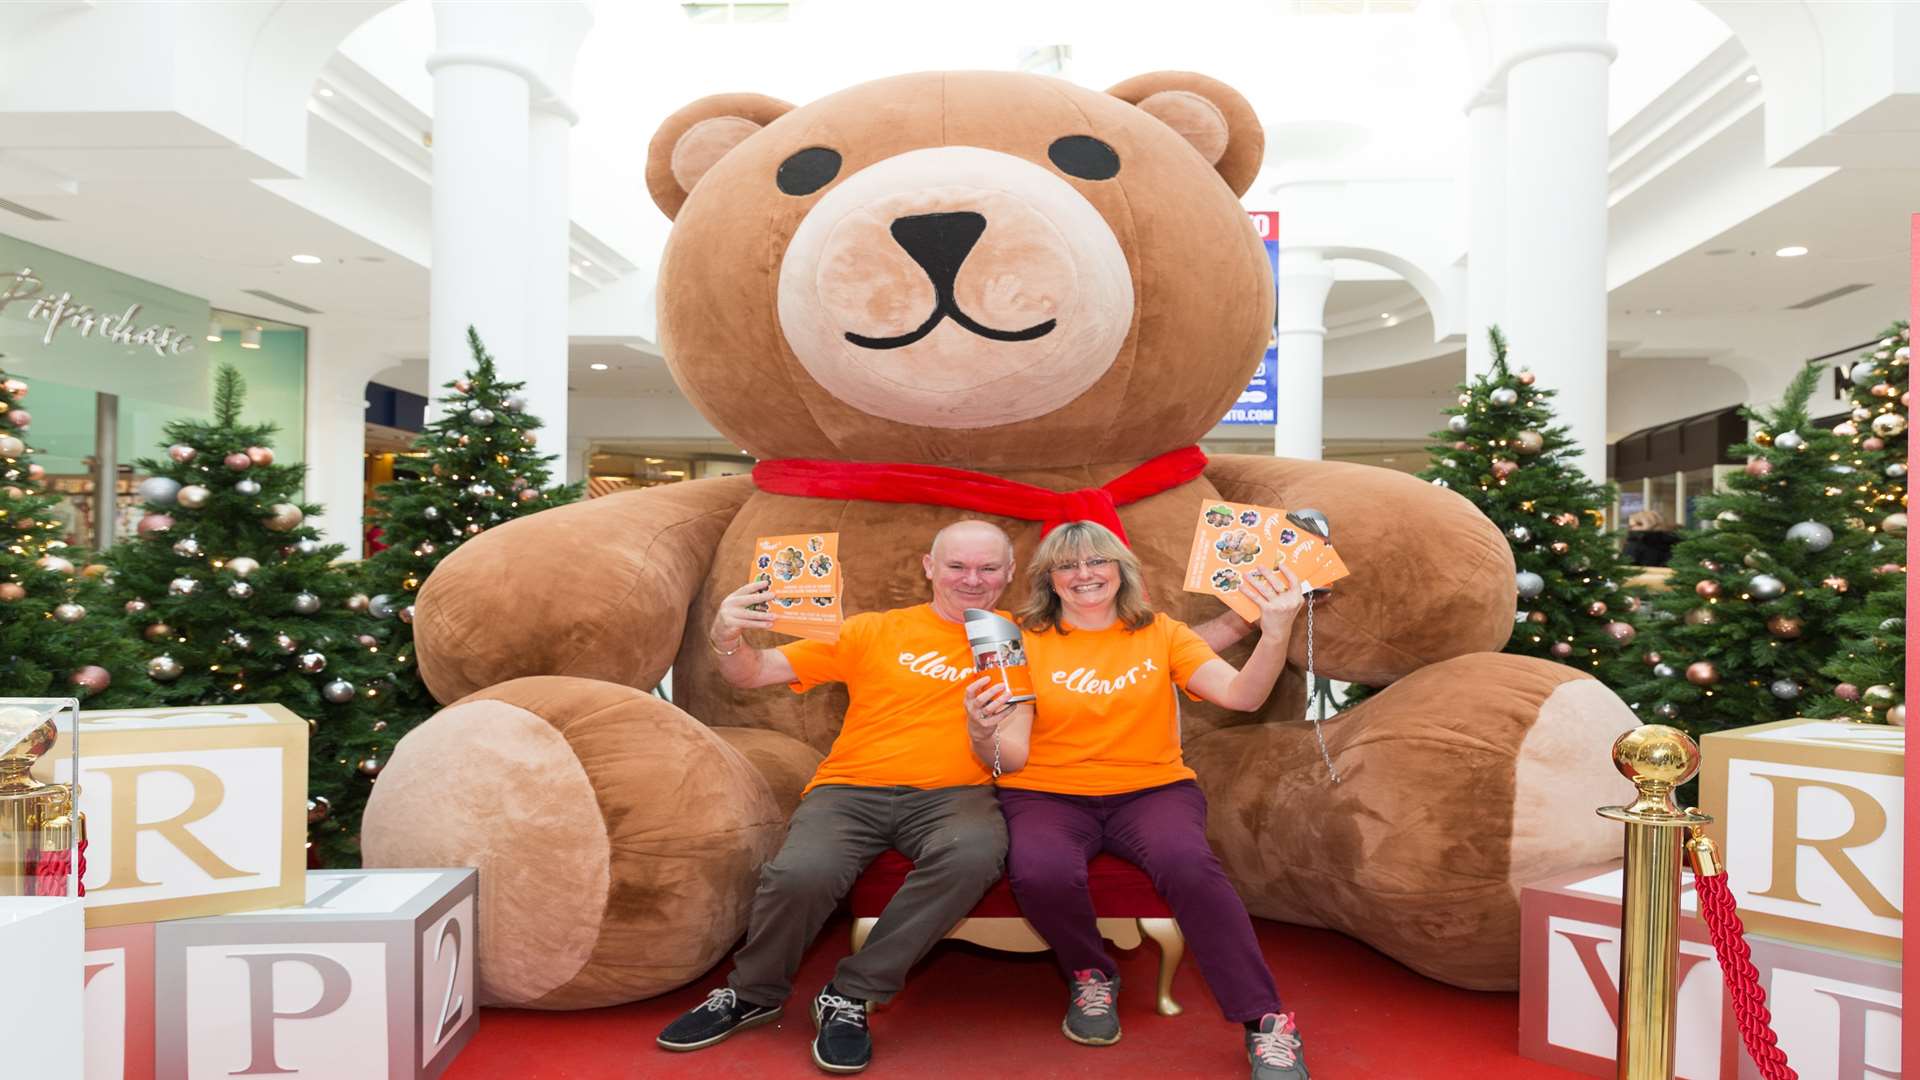 Meet the biggest Teddy in Tunbridge Wells for ellenor at the Royal Victoria Place